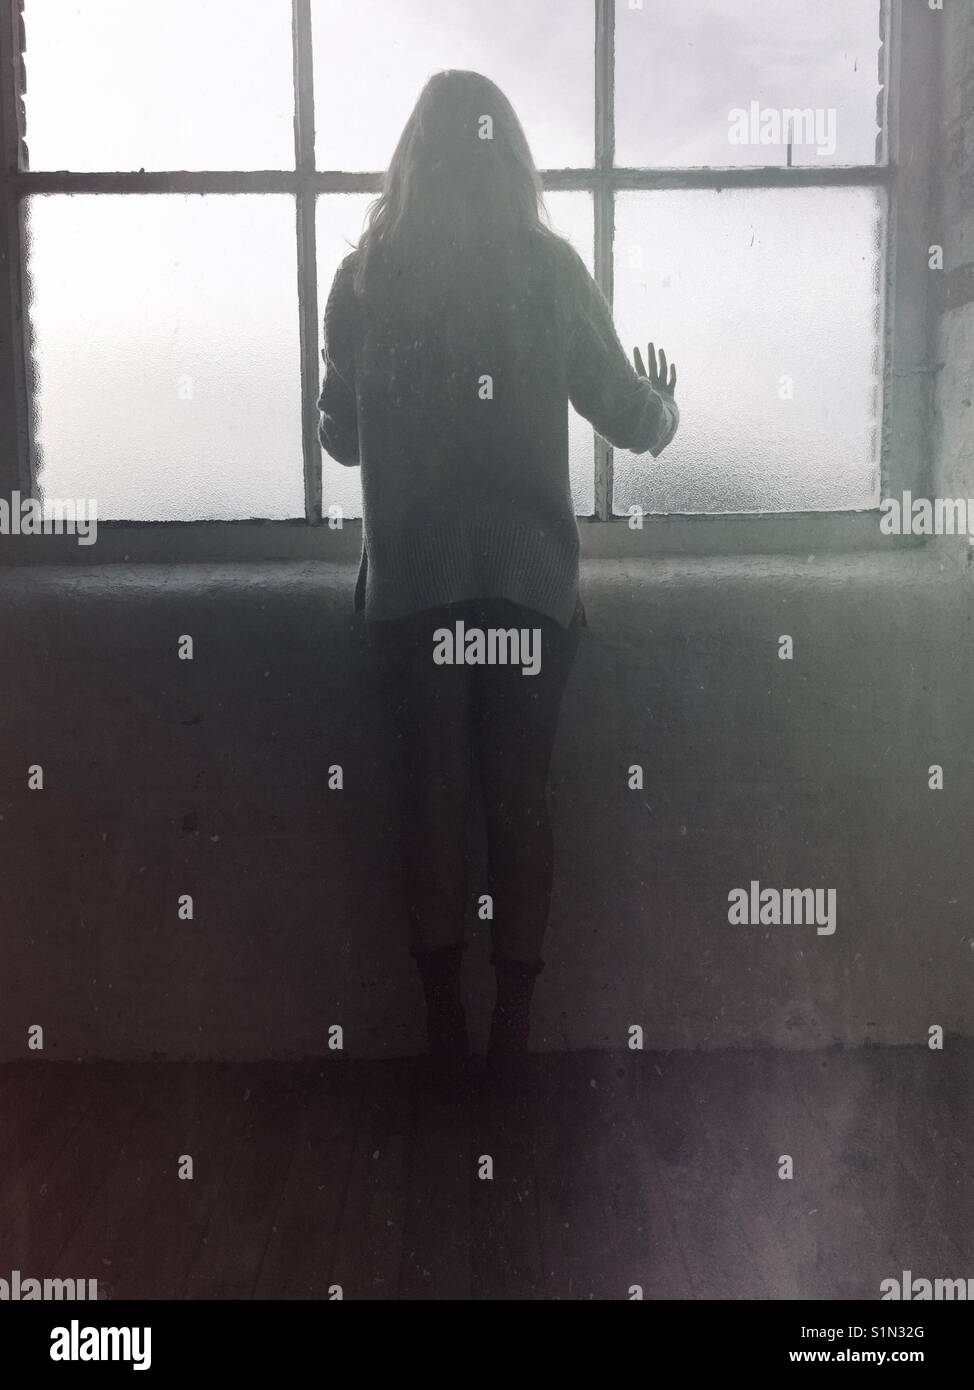 Rear view silhouette of a woman standing by the window Stock Photo